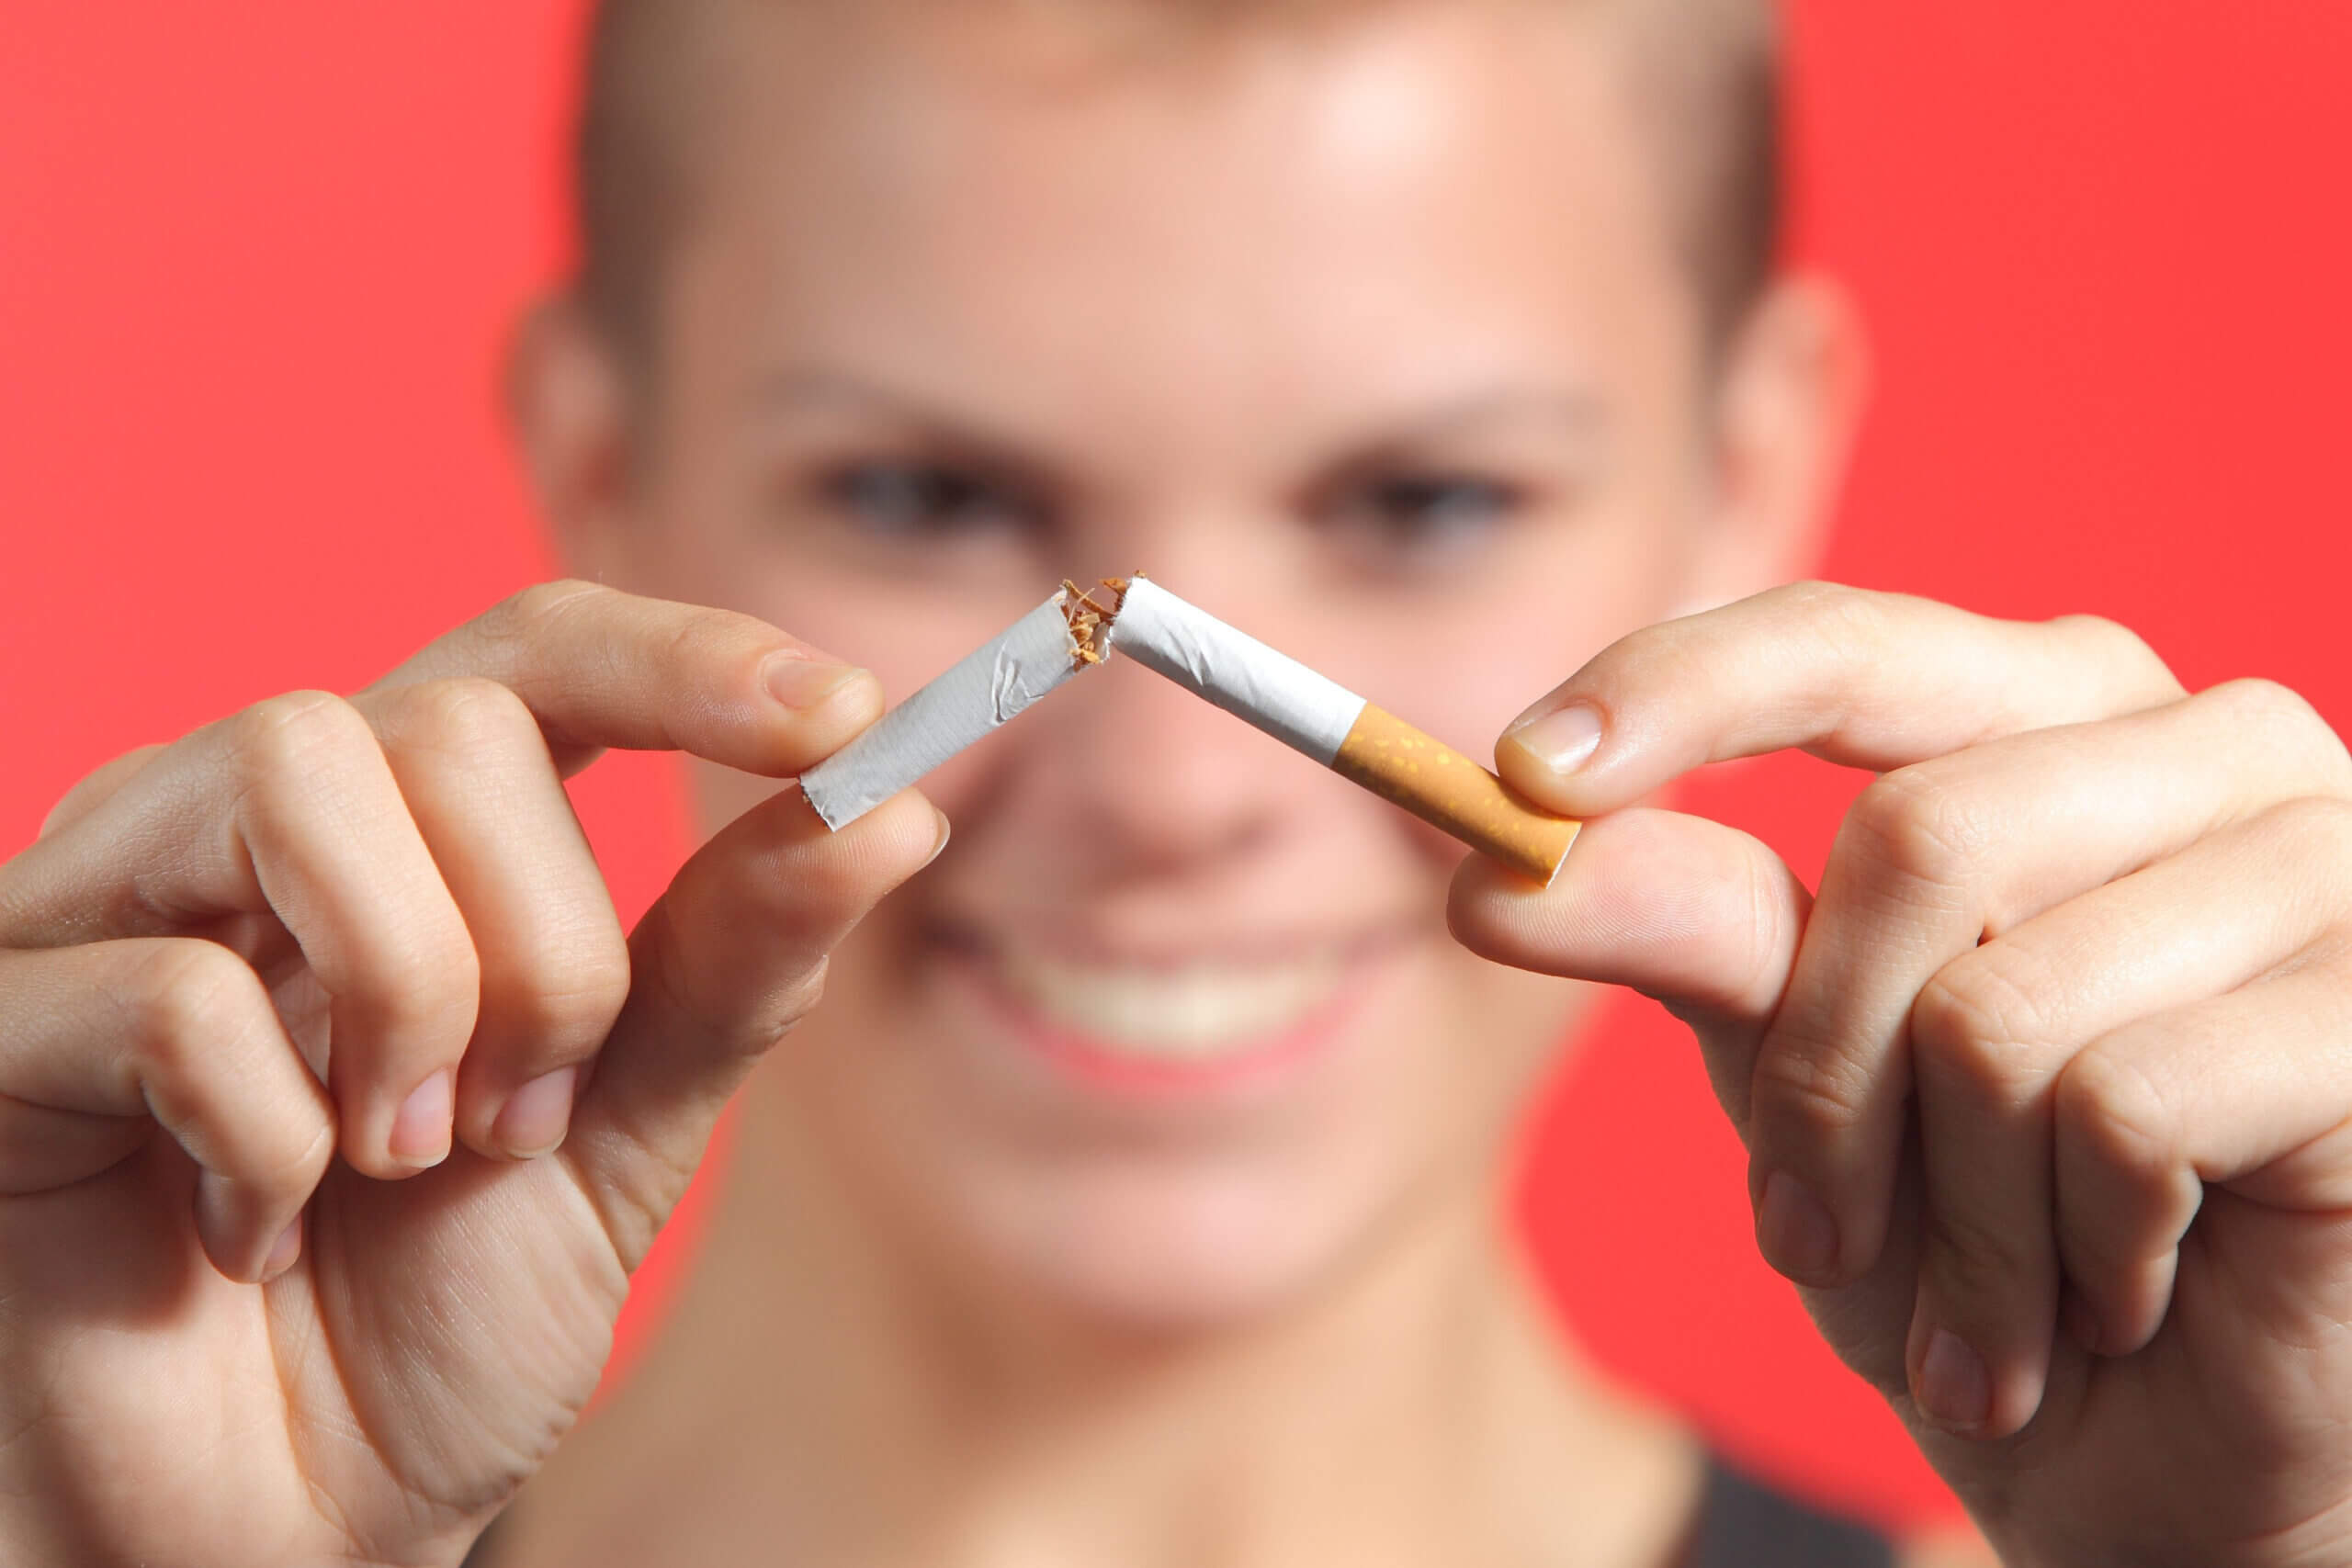 Woman breaking a cigarette on a red background